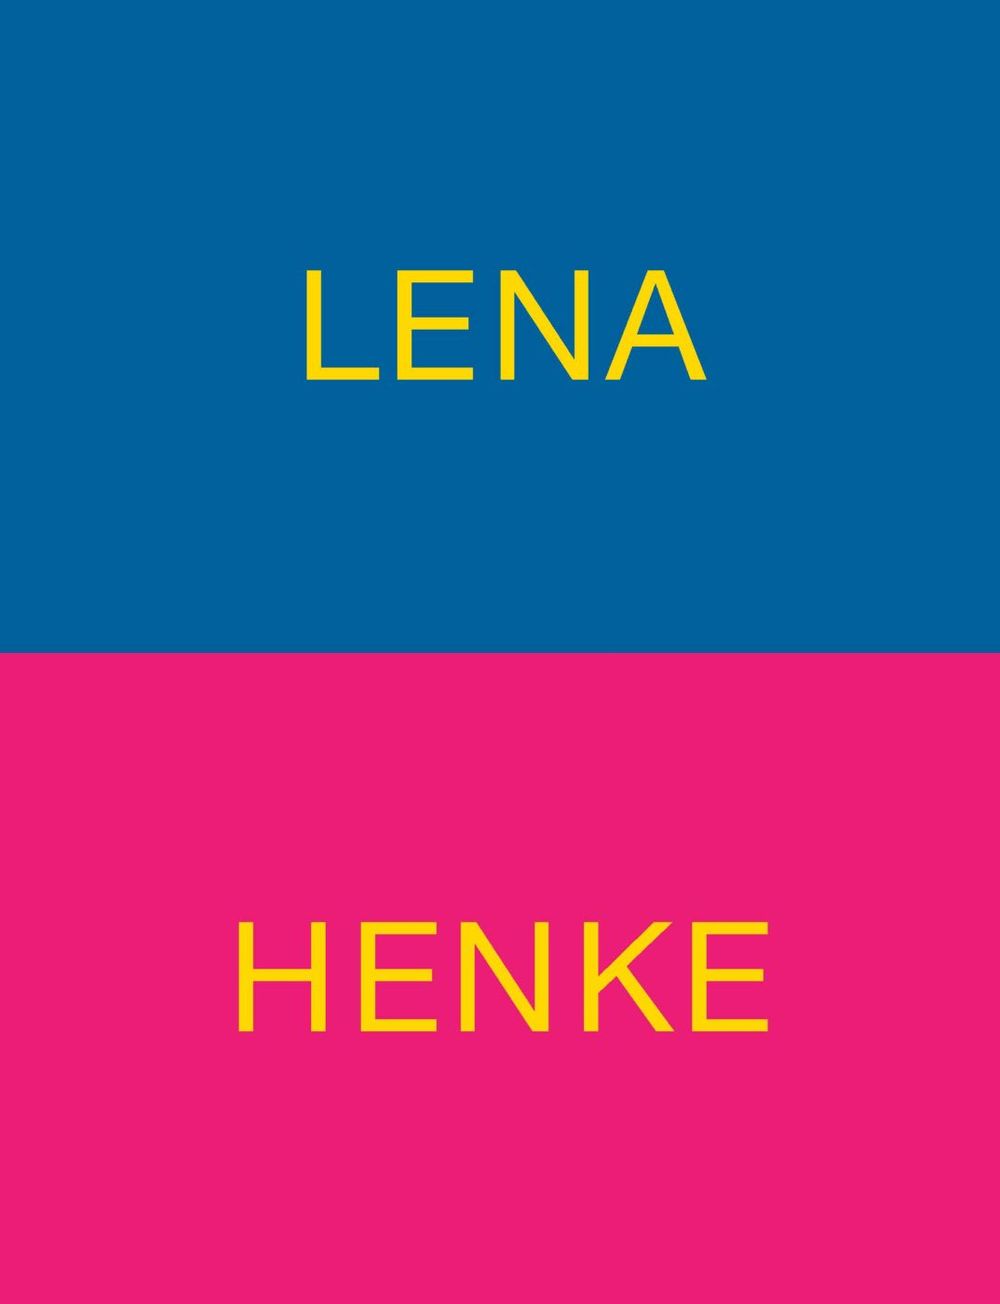 Book cover on plain gray background with title of Lena Henke: Schrei mich nicht an, Krieger!